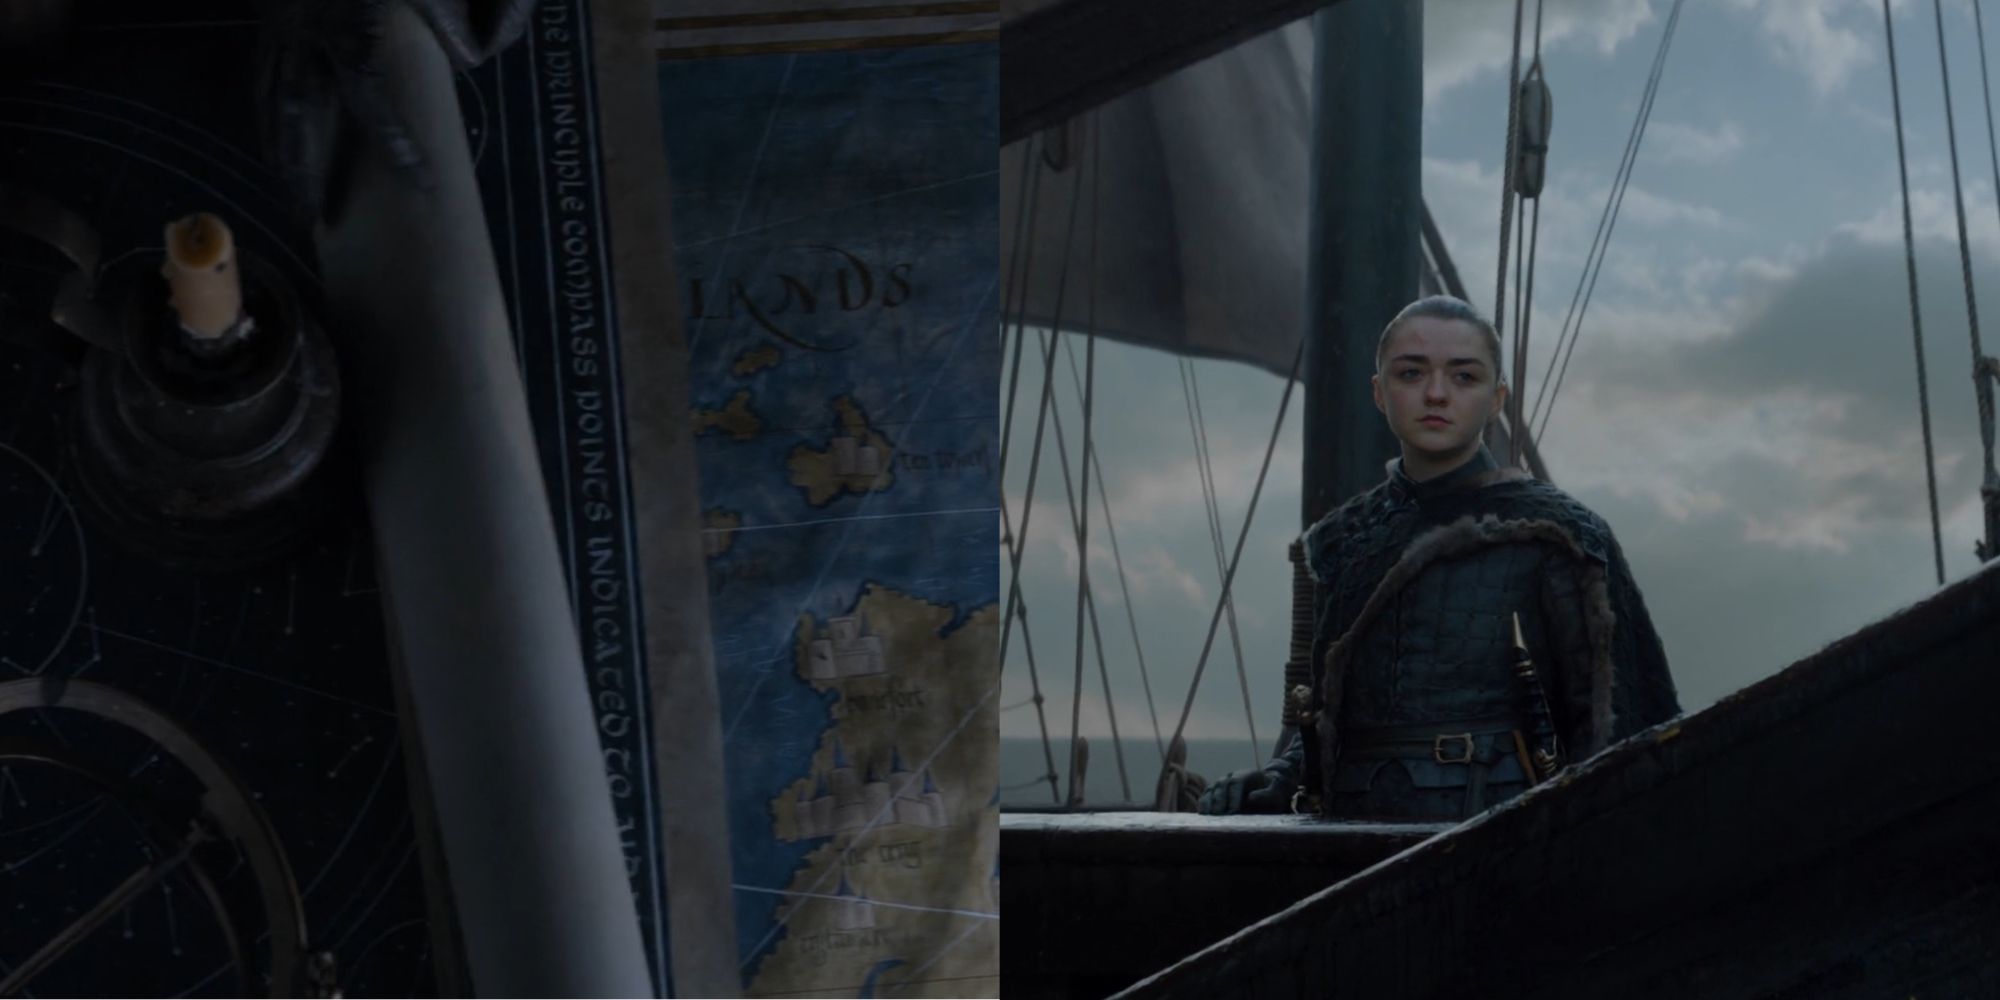 Feature image showing Westeros maps and Arya Stark sailing the Sunset Sea in Game of Thrones.